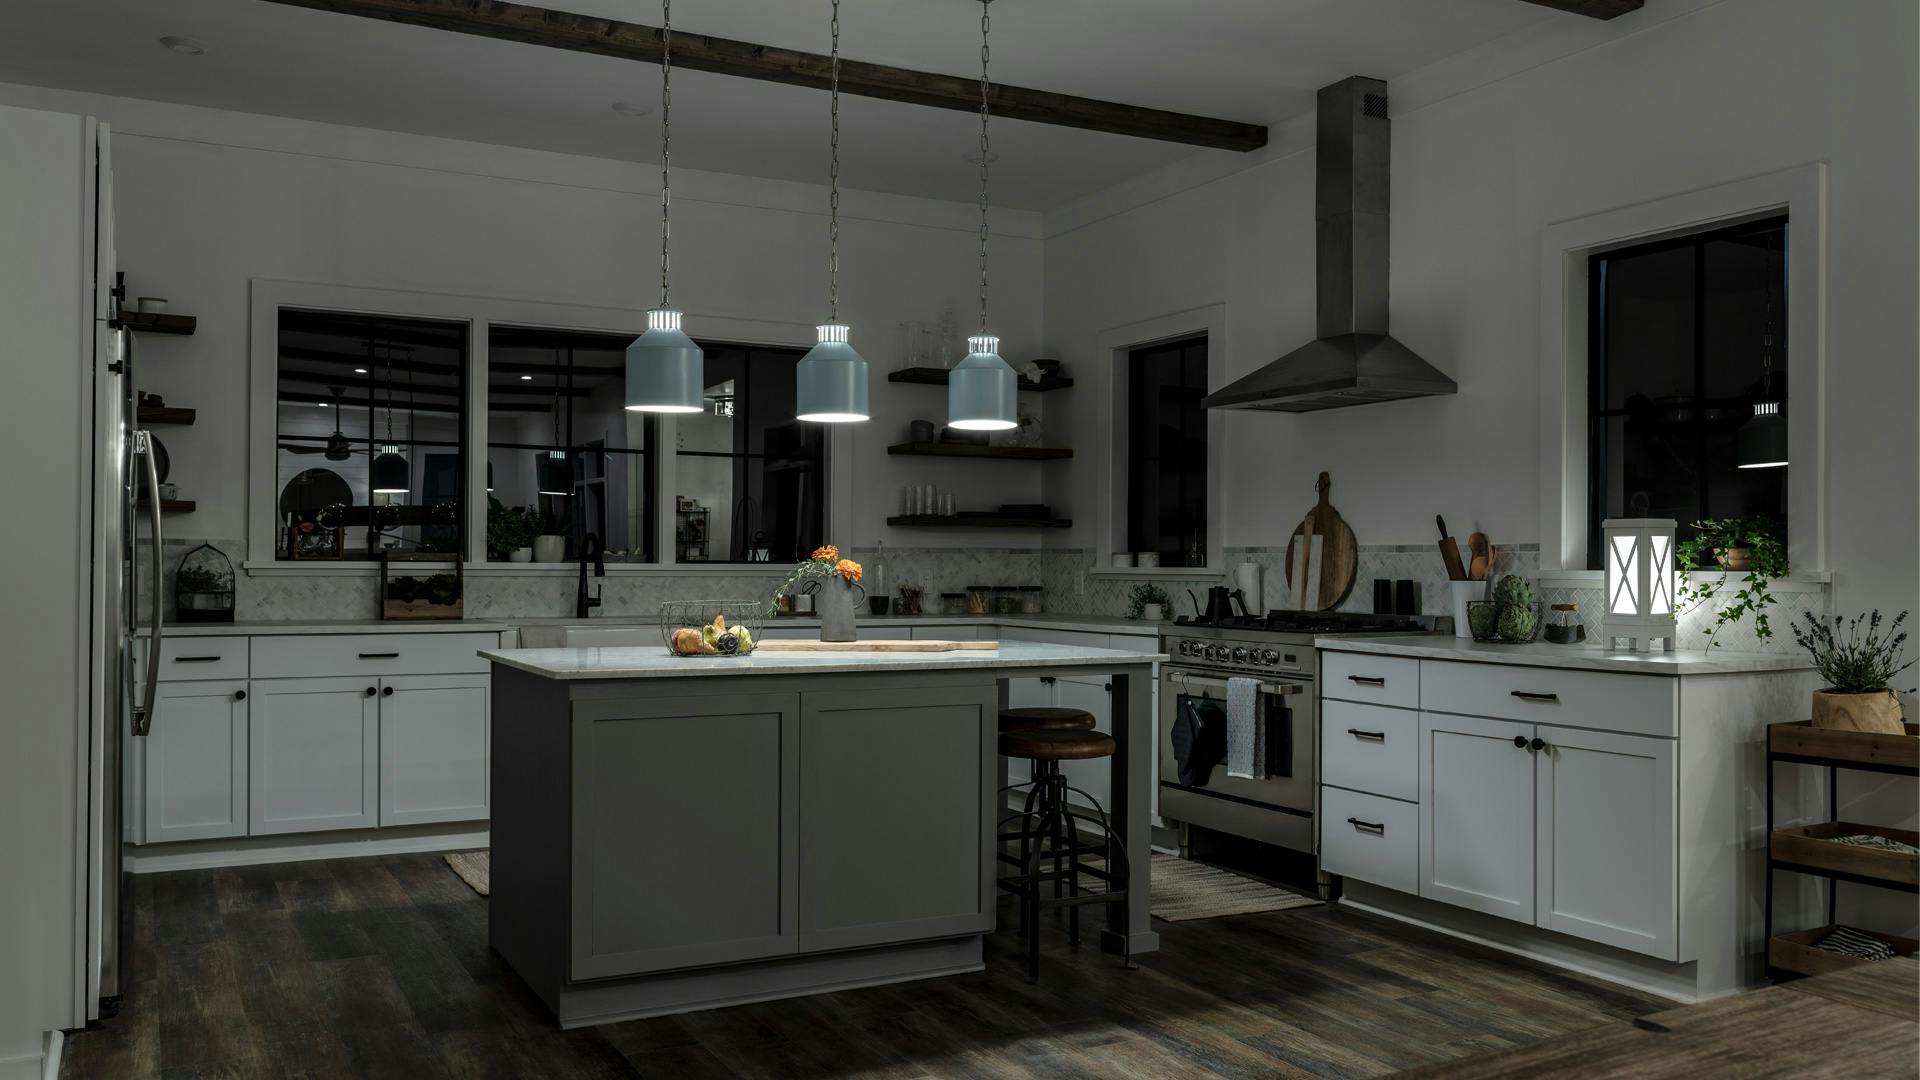 A kitchen with tape lights, shelf lighting, kicktoe lighting, and Montauk pendants, with just the pendant lights turned on at night